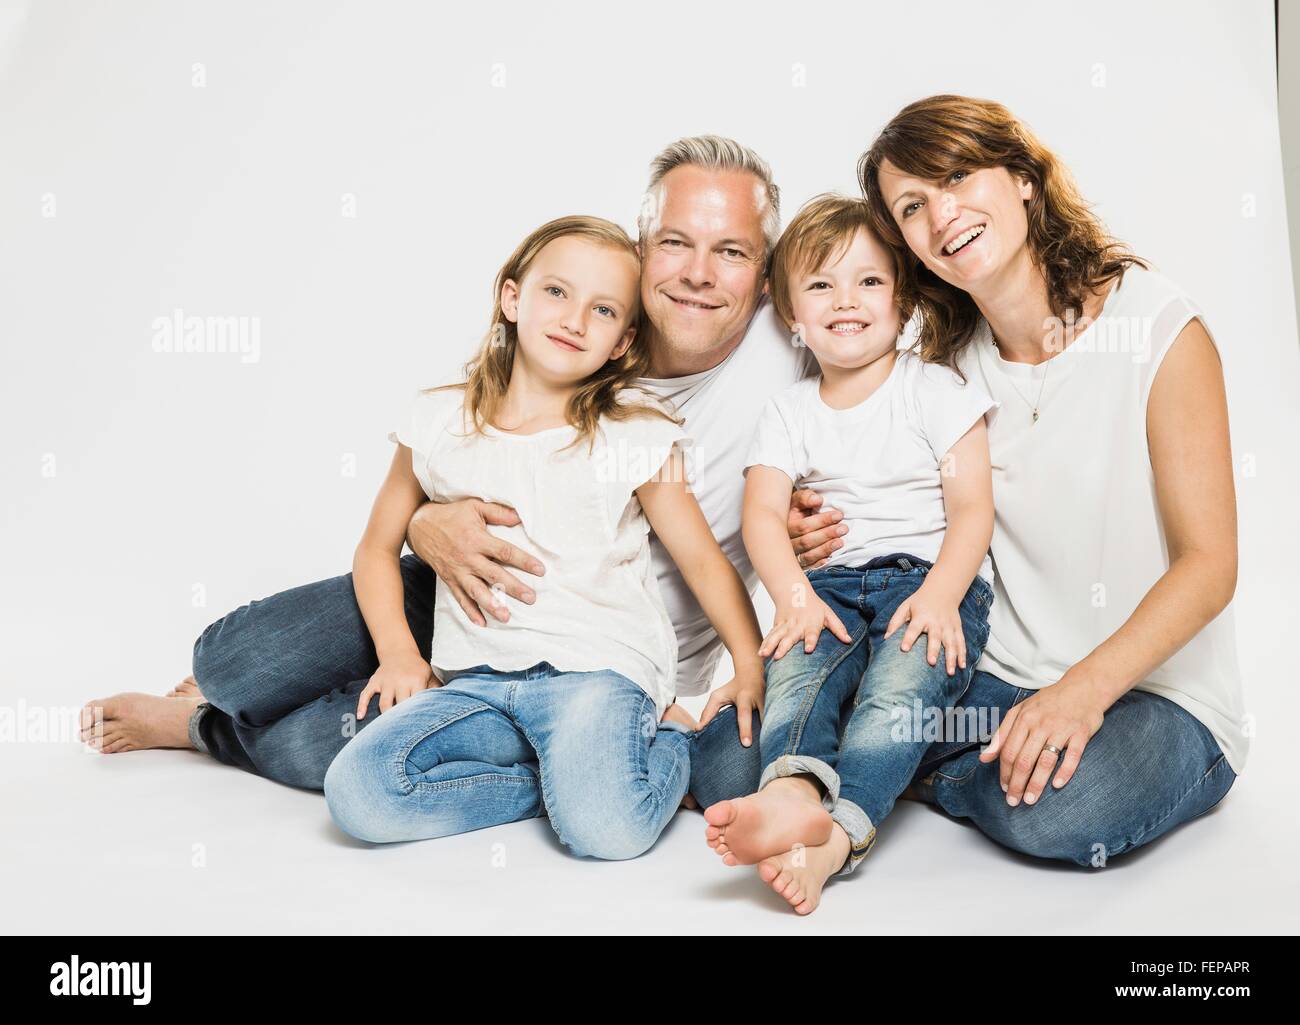 Studio portrait of parents sitting on floor with son and daughter Stock Photo